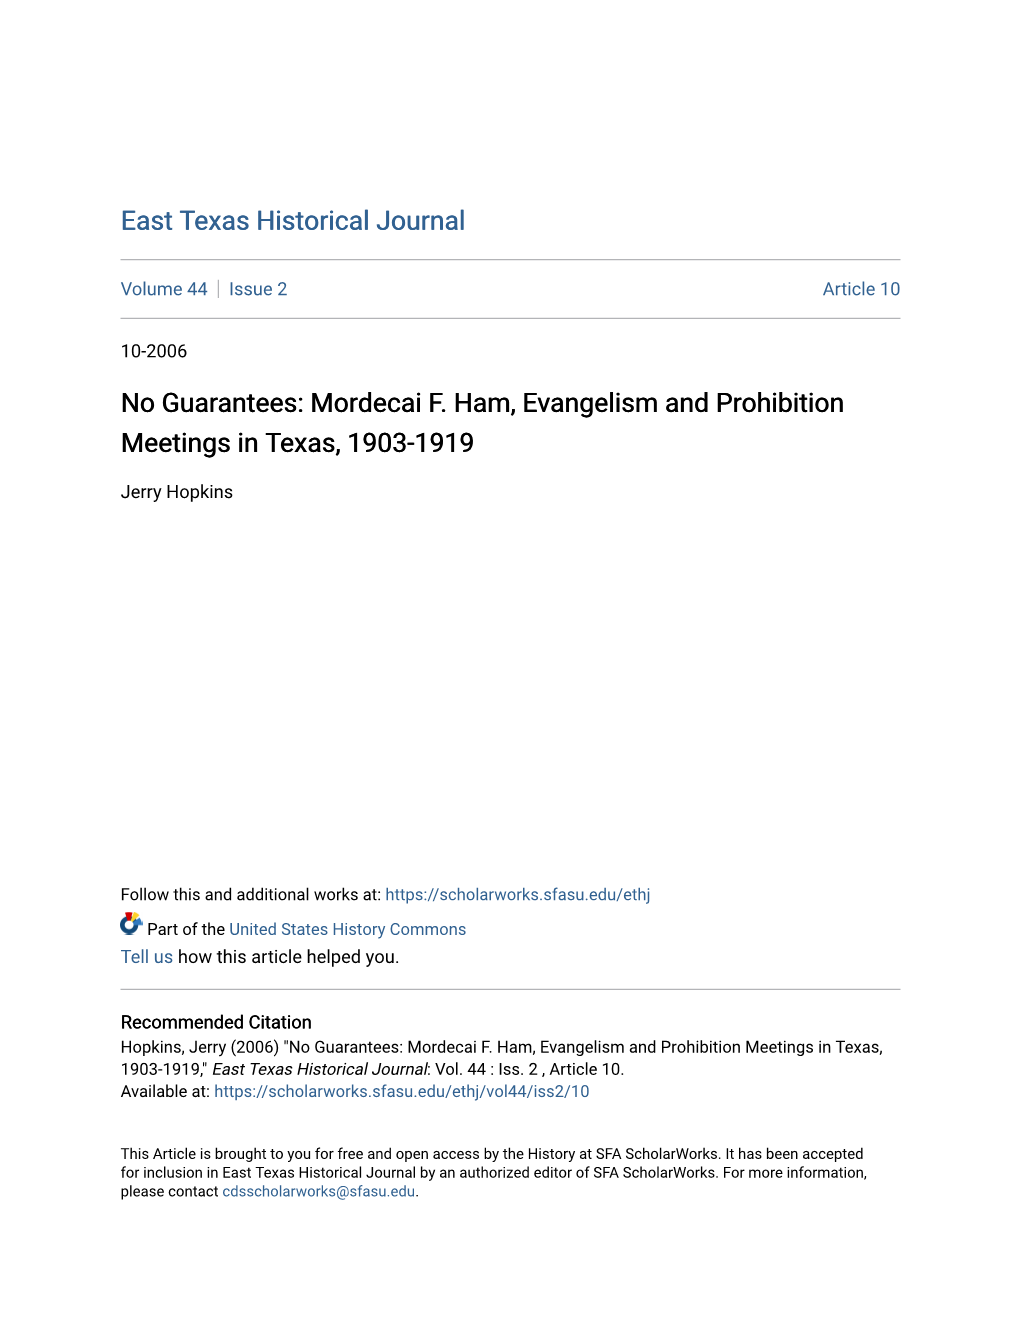 Mordecai F. Ham, Evangelism and Prohibition Meetings in Texas, 1903-1919